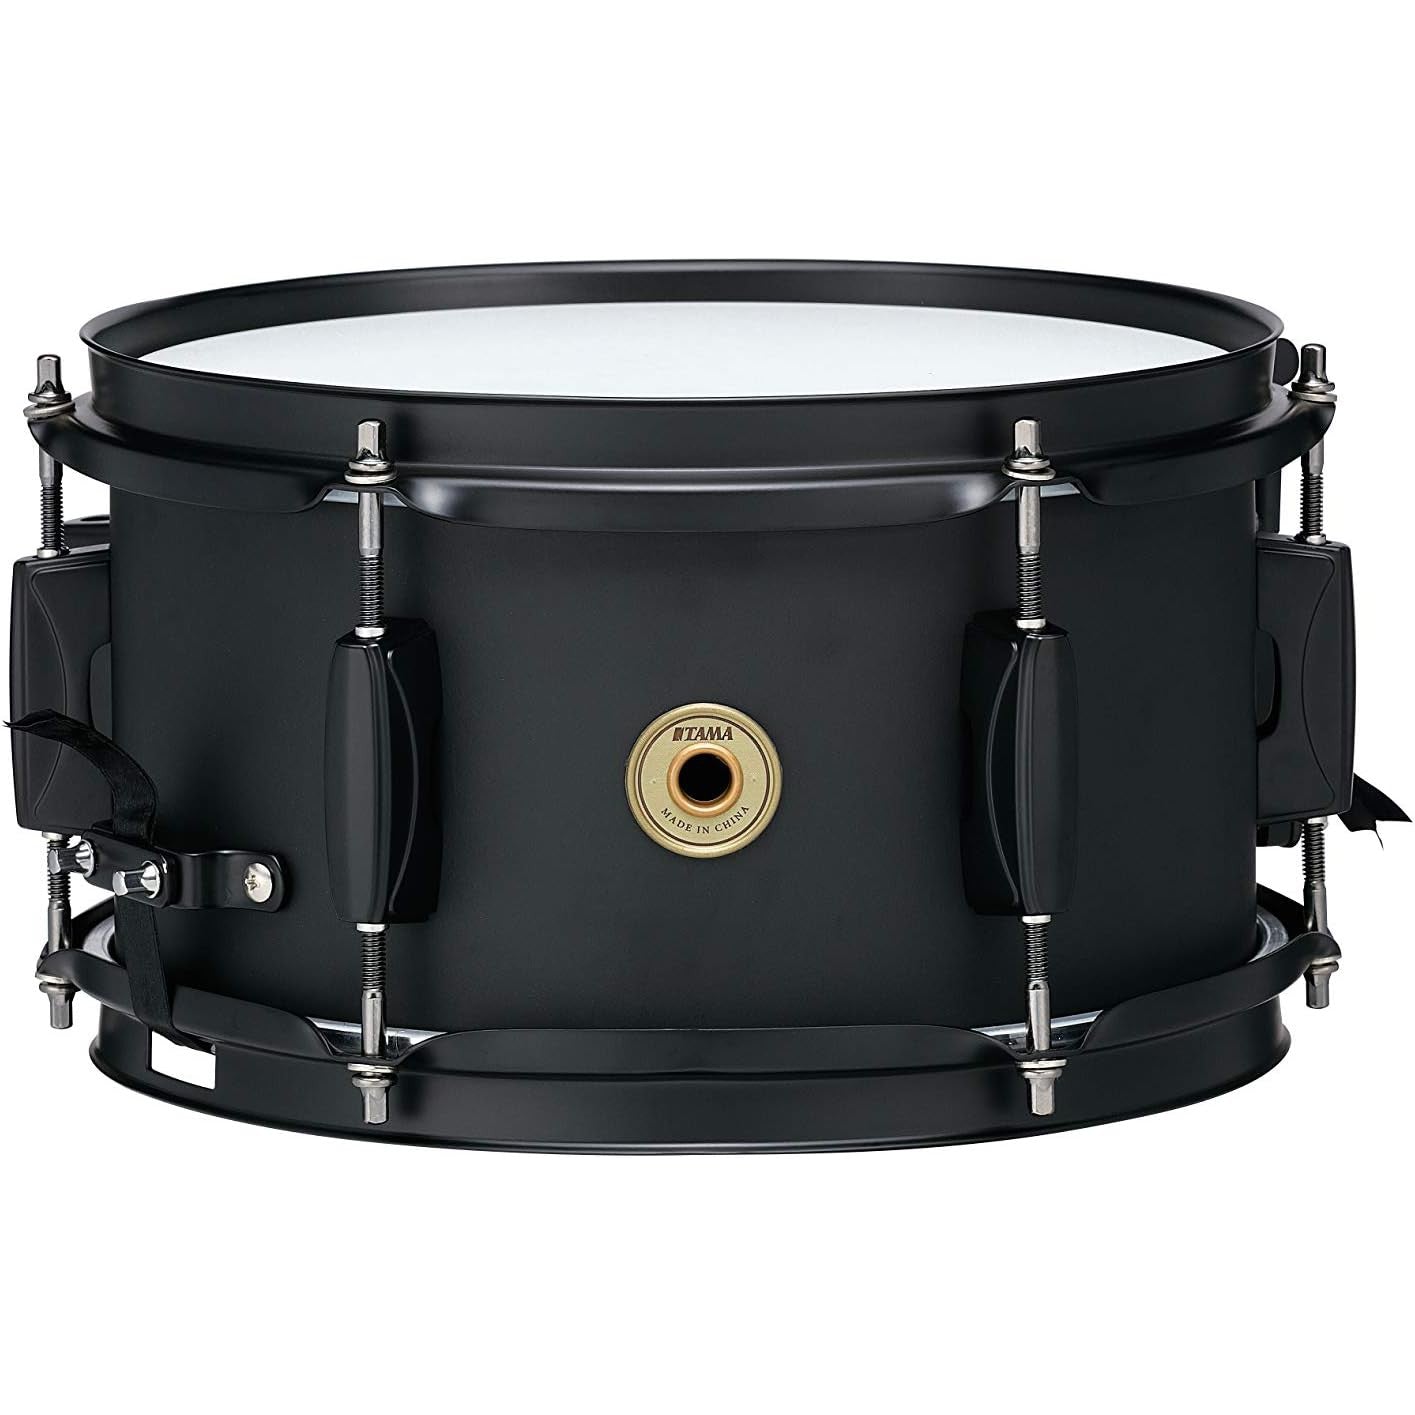 Trống Snare Tama Metalworks BST1055MBK 10"×5.5"-Mai Nguyên Music